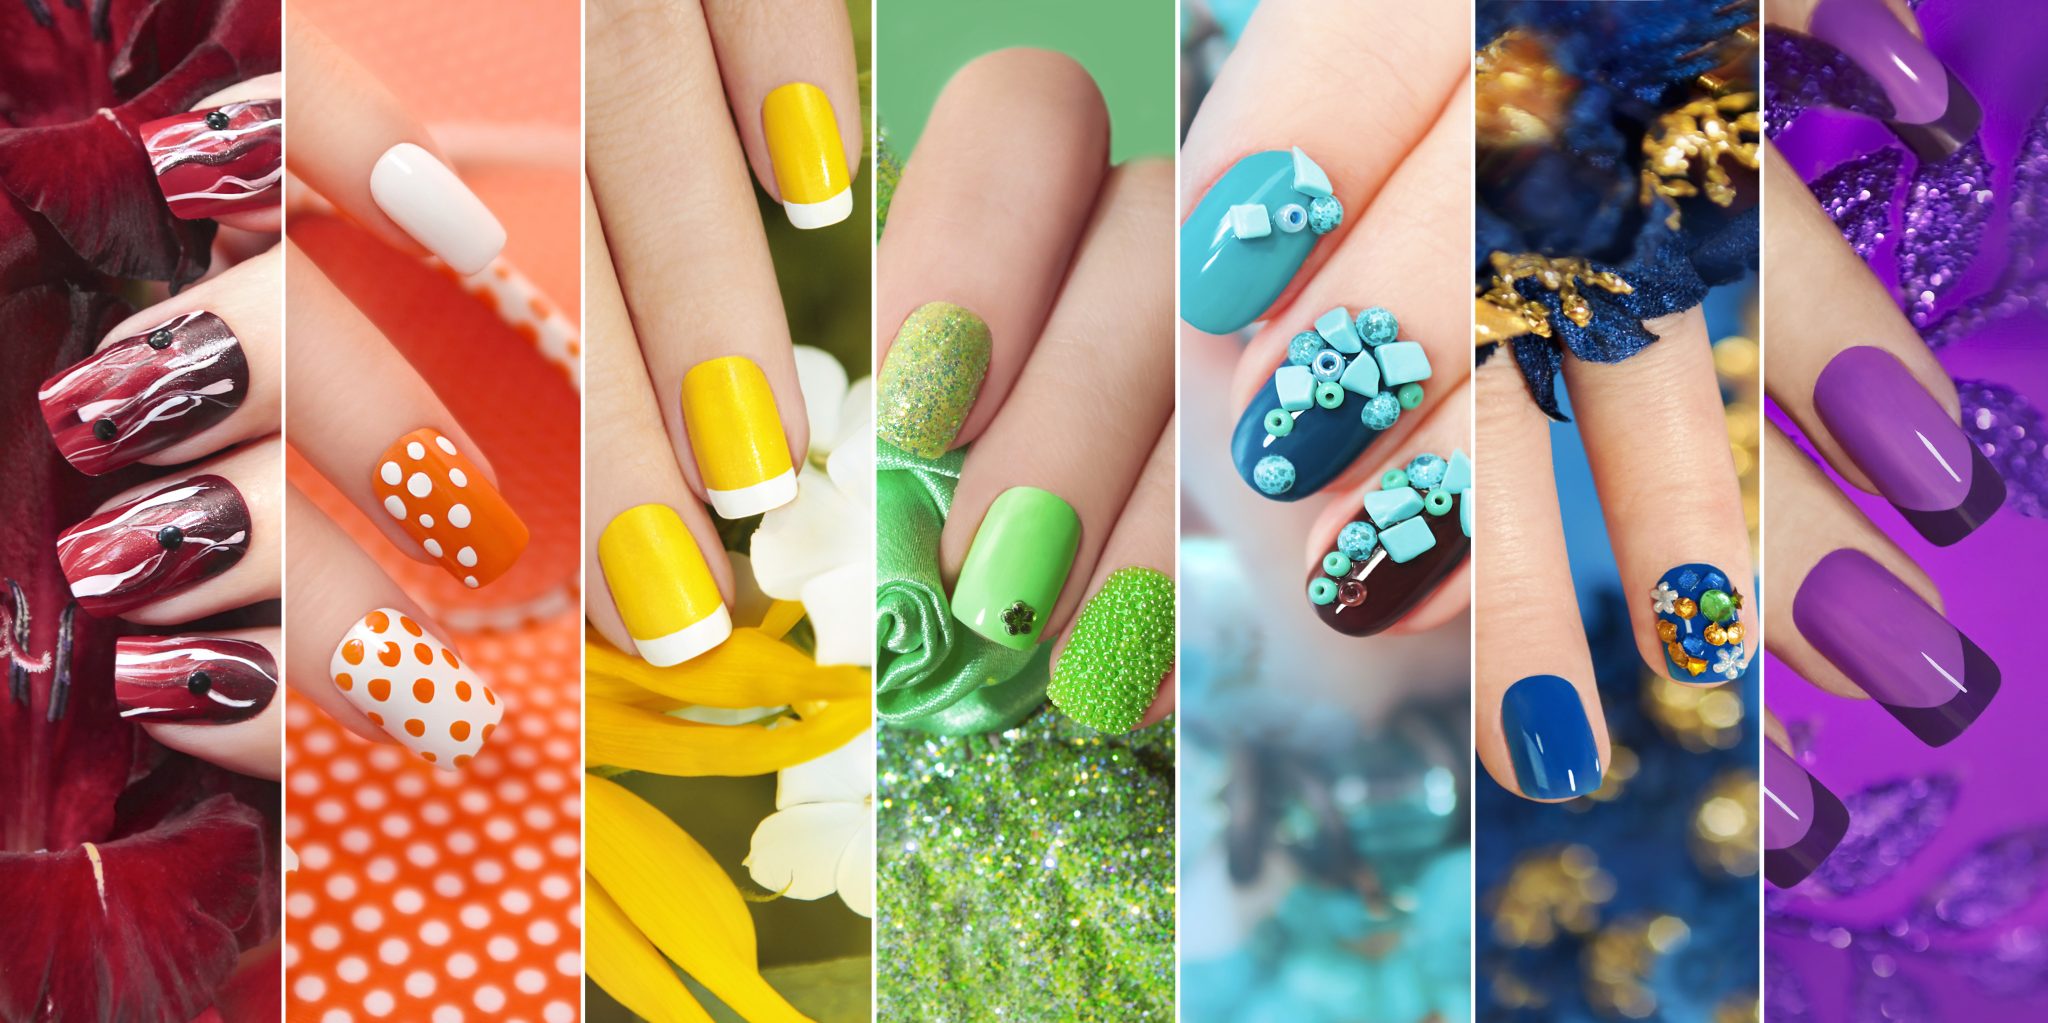 3. Beautiful Nail Designs for Teens - wide 2